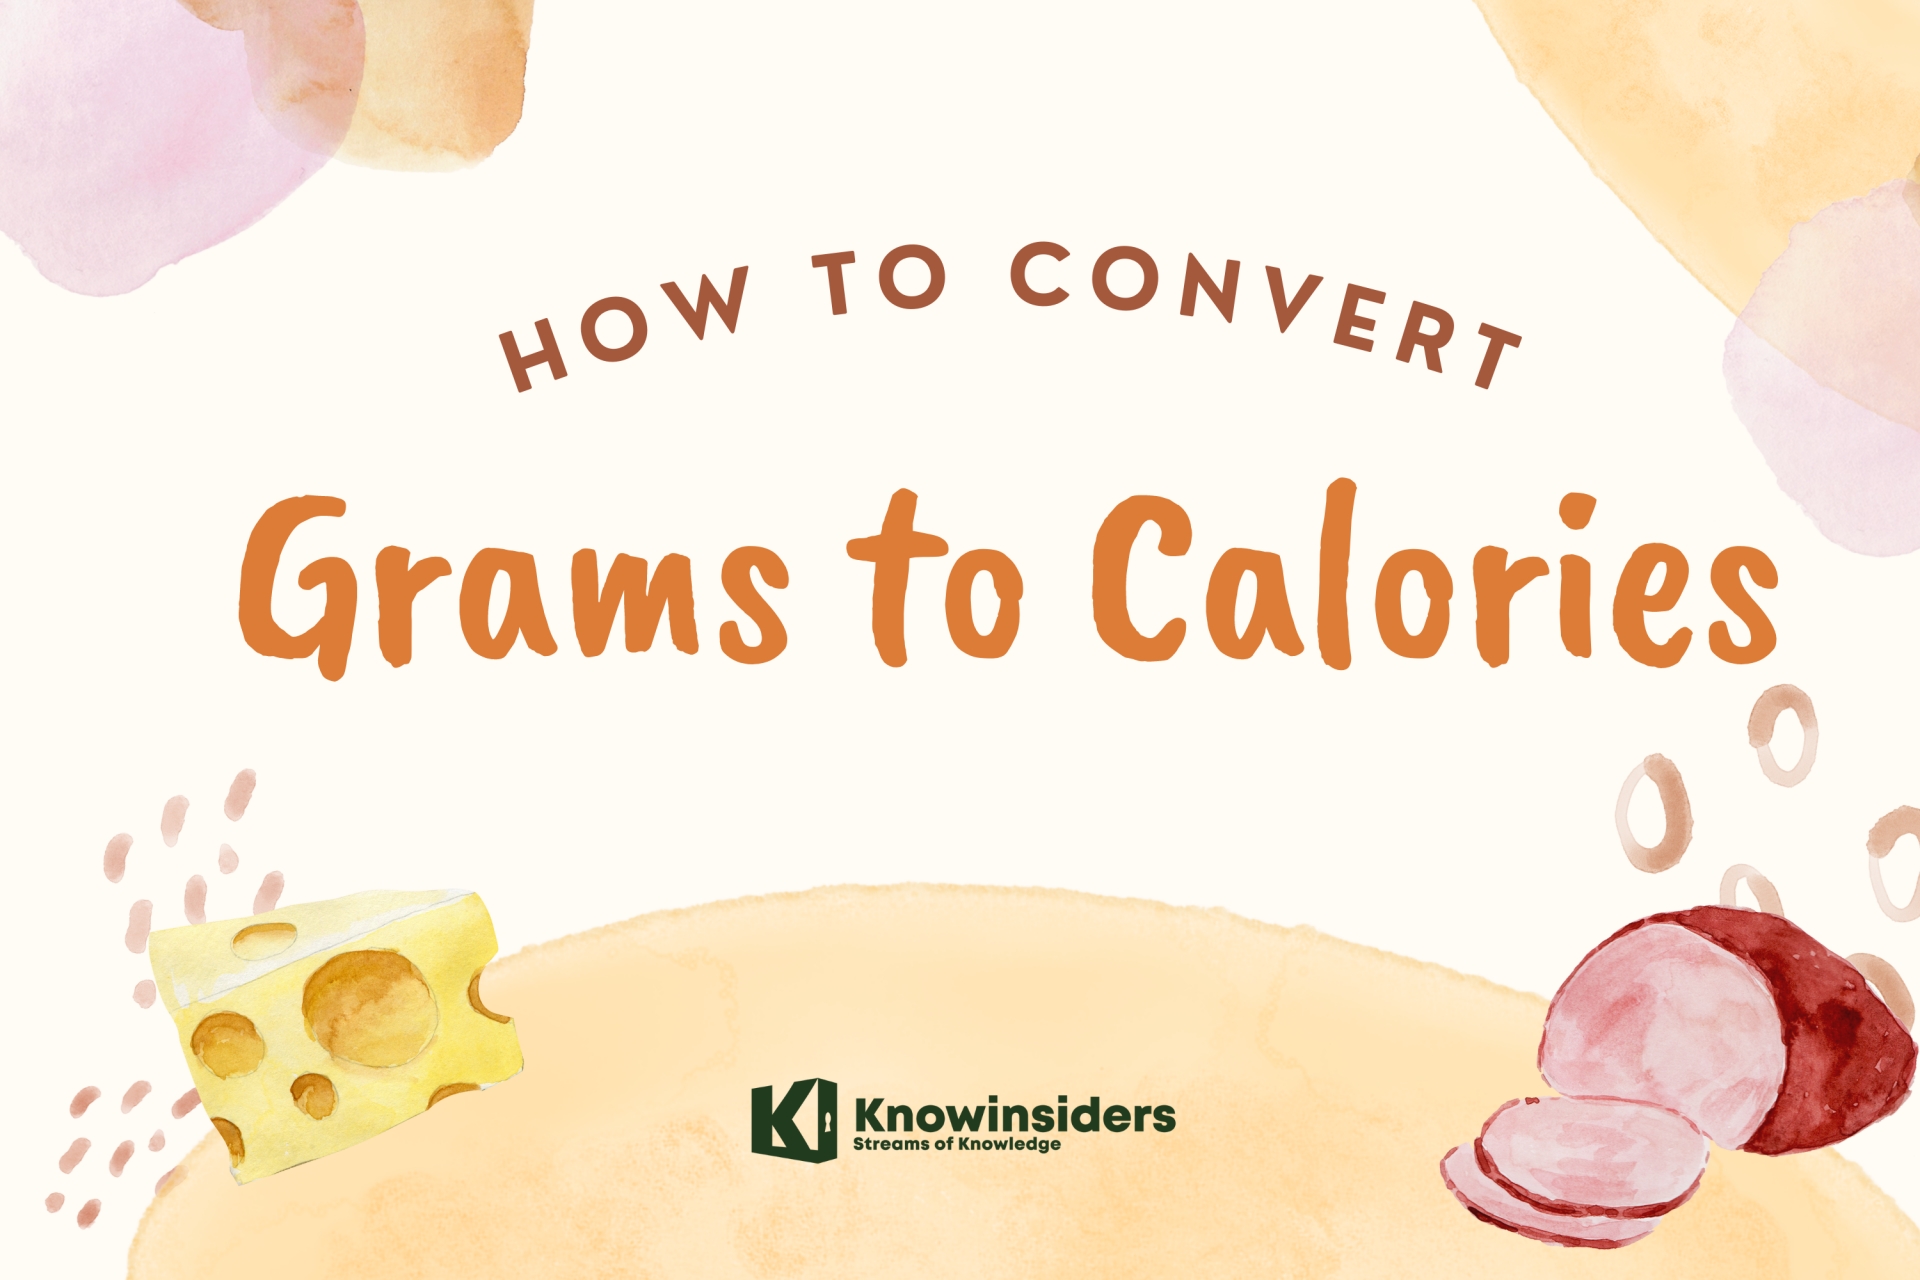 How to Convert Grams to Calories: Top Easiest Ways